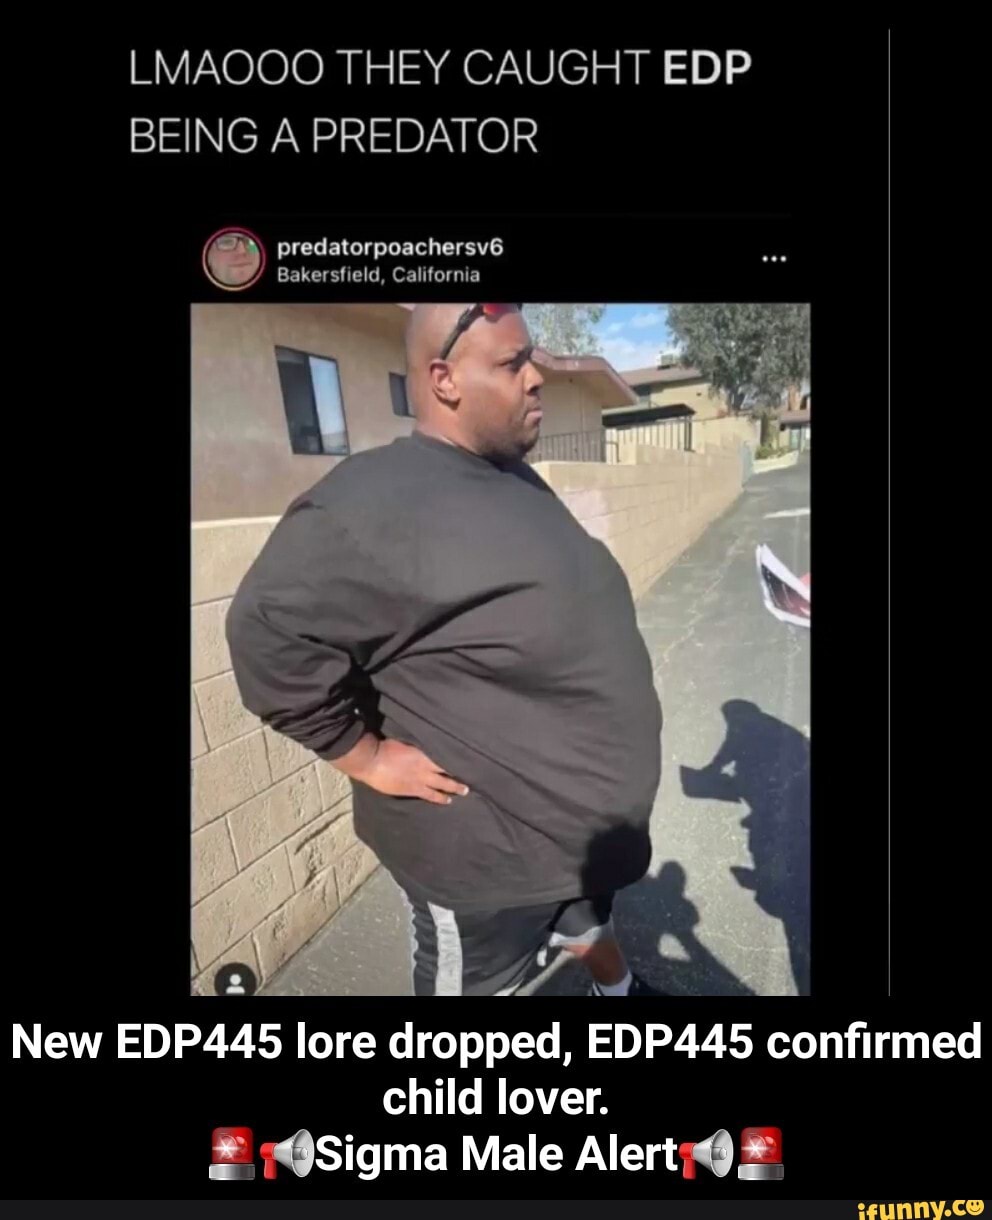 EDP445 was allegedly caught in another child predator sting